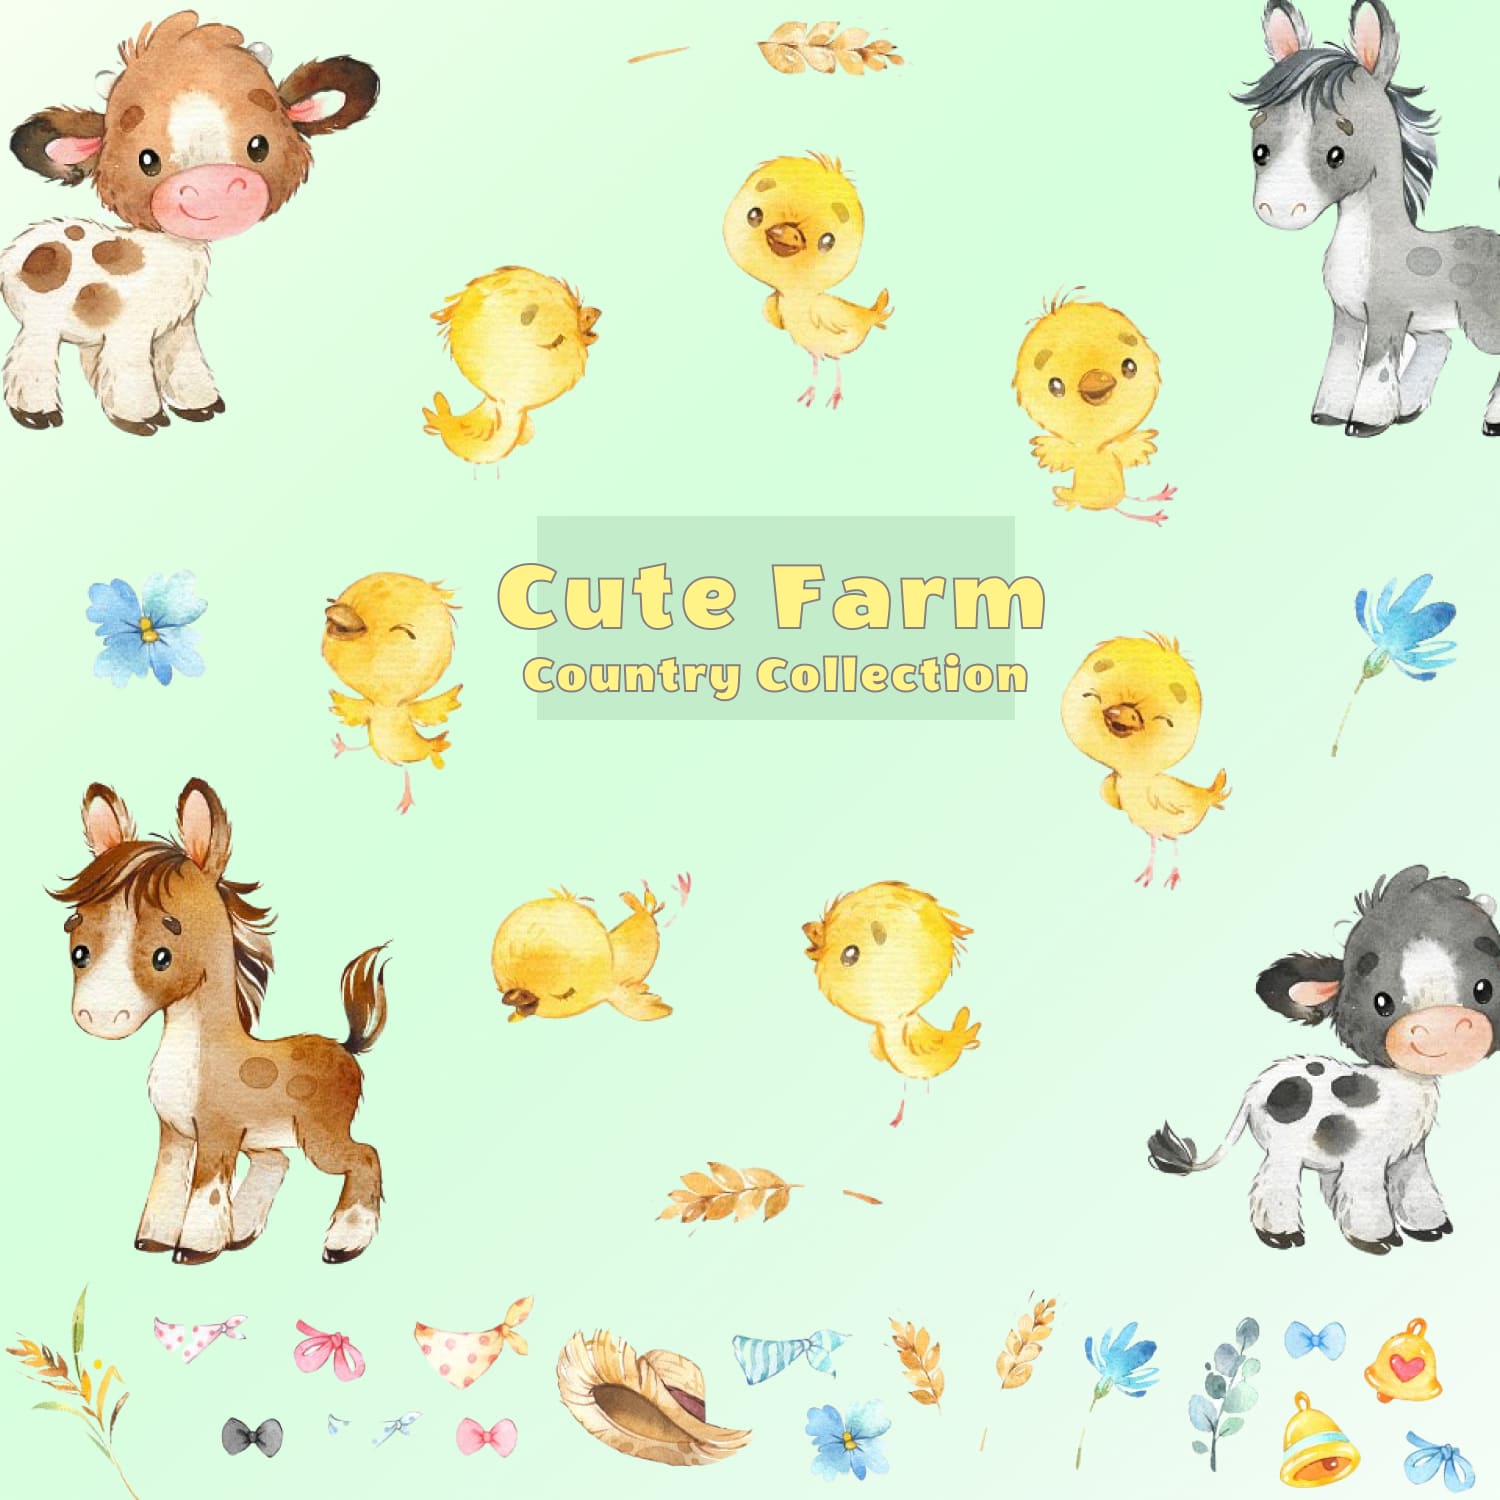 These cute little country animals will bring fun to your projects.